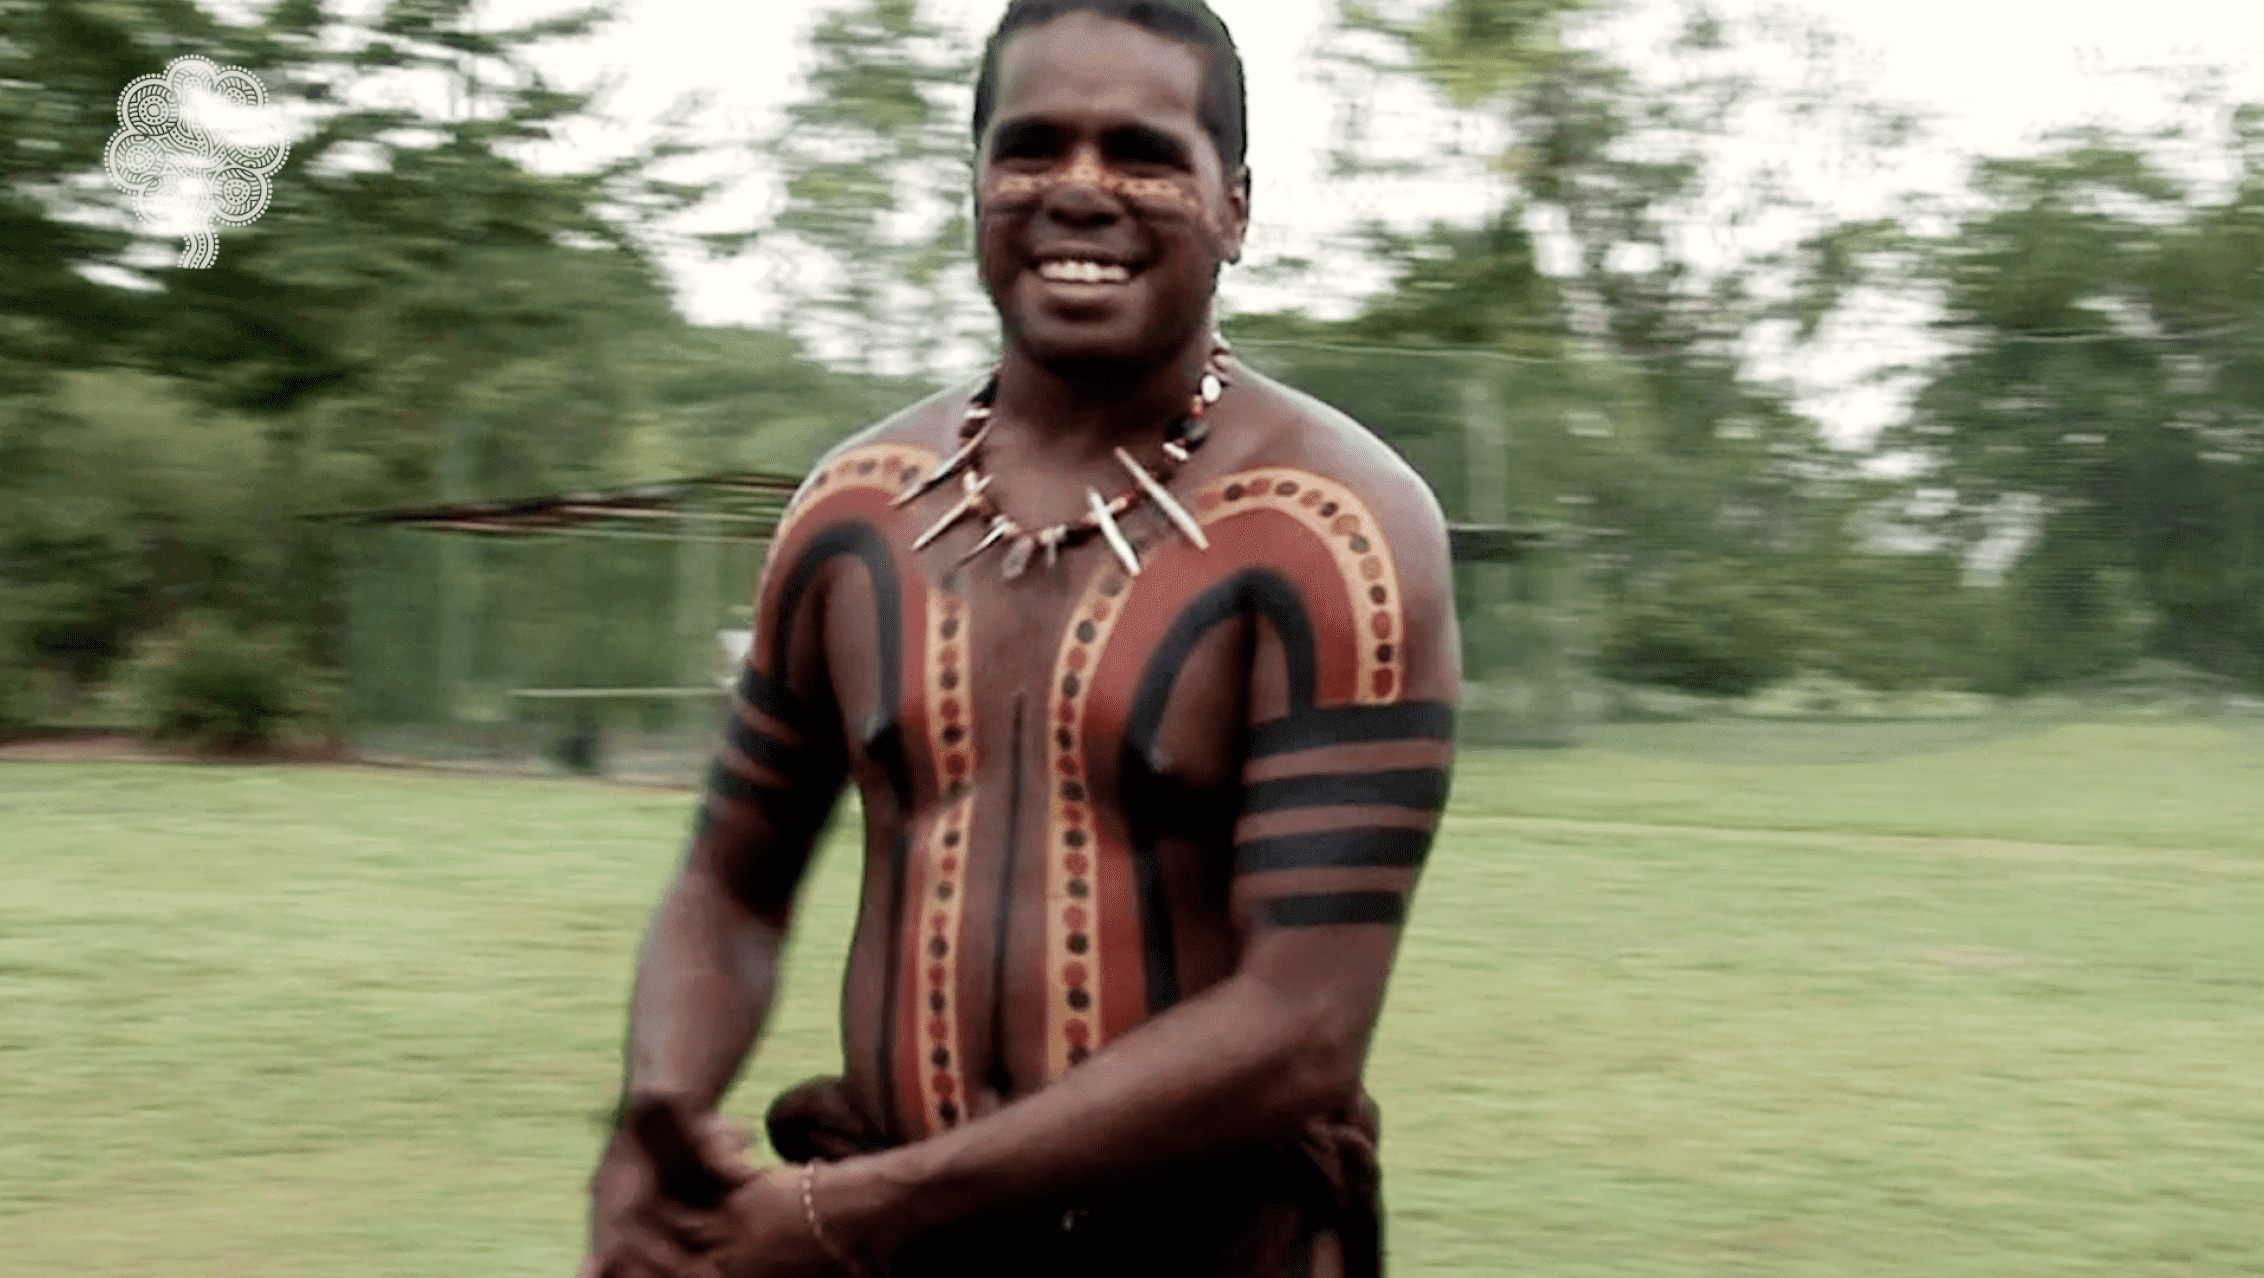 Man with traditional body paint smiles at camera